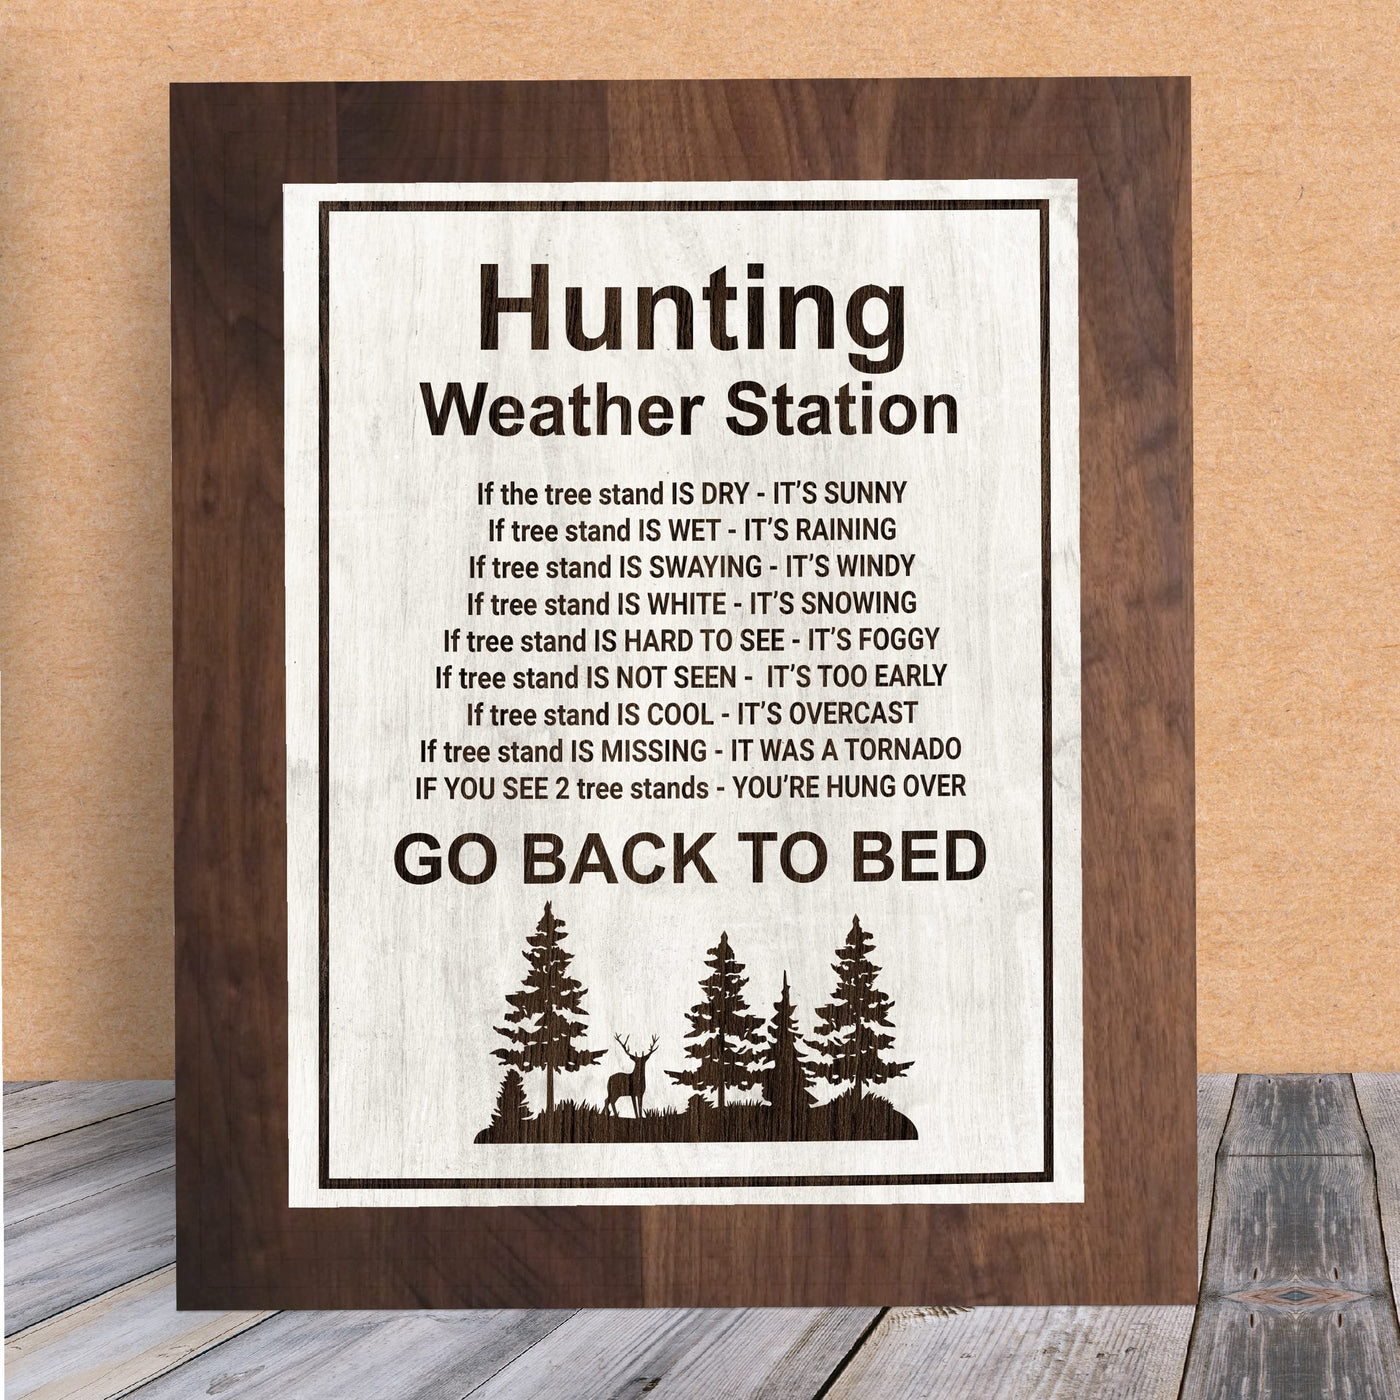 Hunting Weather Station-Funny Hunt Season Wall Sign -8 x 10" Country Rustic Art Print -Ready to Frame. Perfect Wall Decoration for Home-Lodge-Man Cave-Cabin-Outdoors Decor. Fun Gift for Hunters!